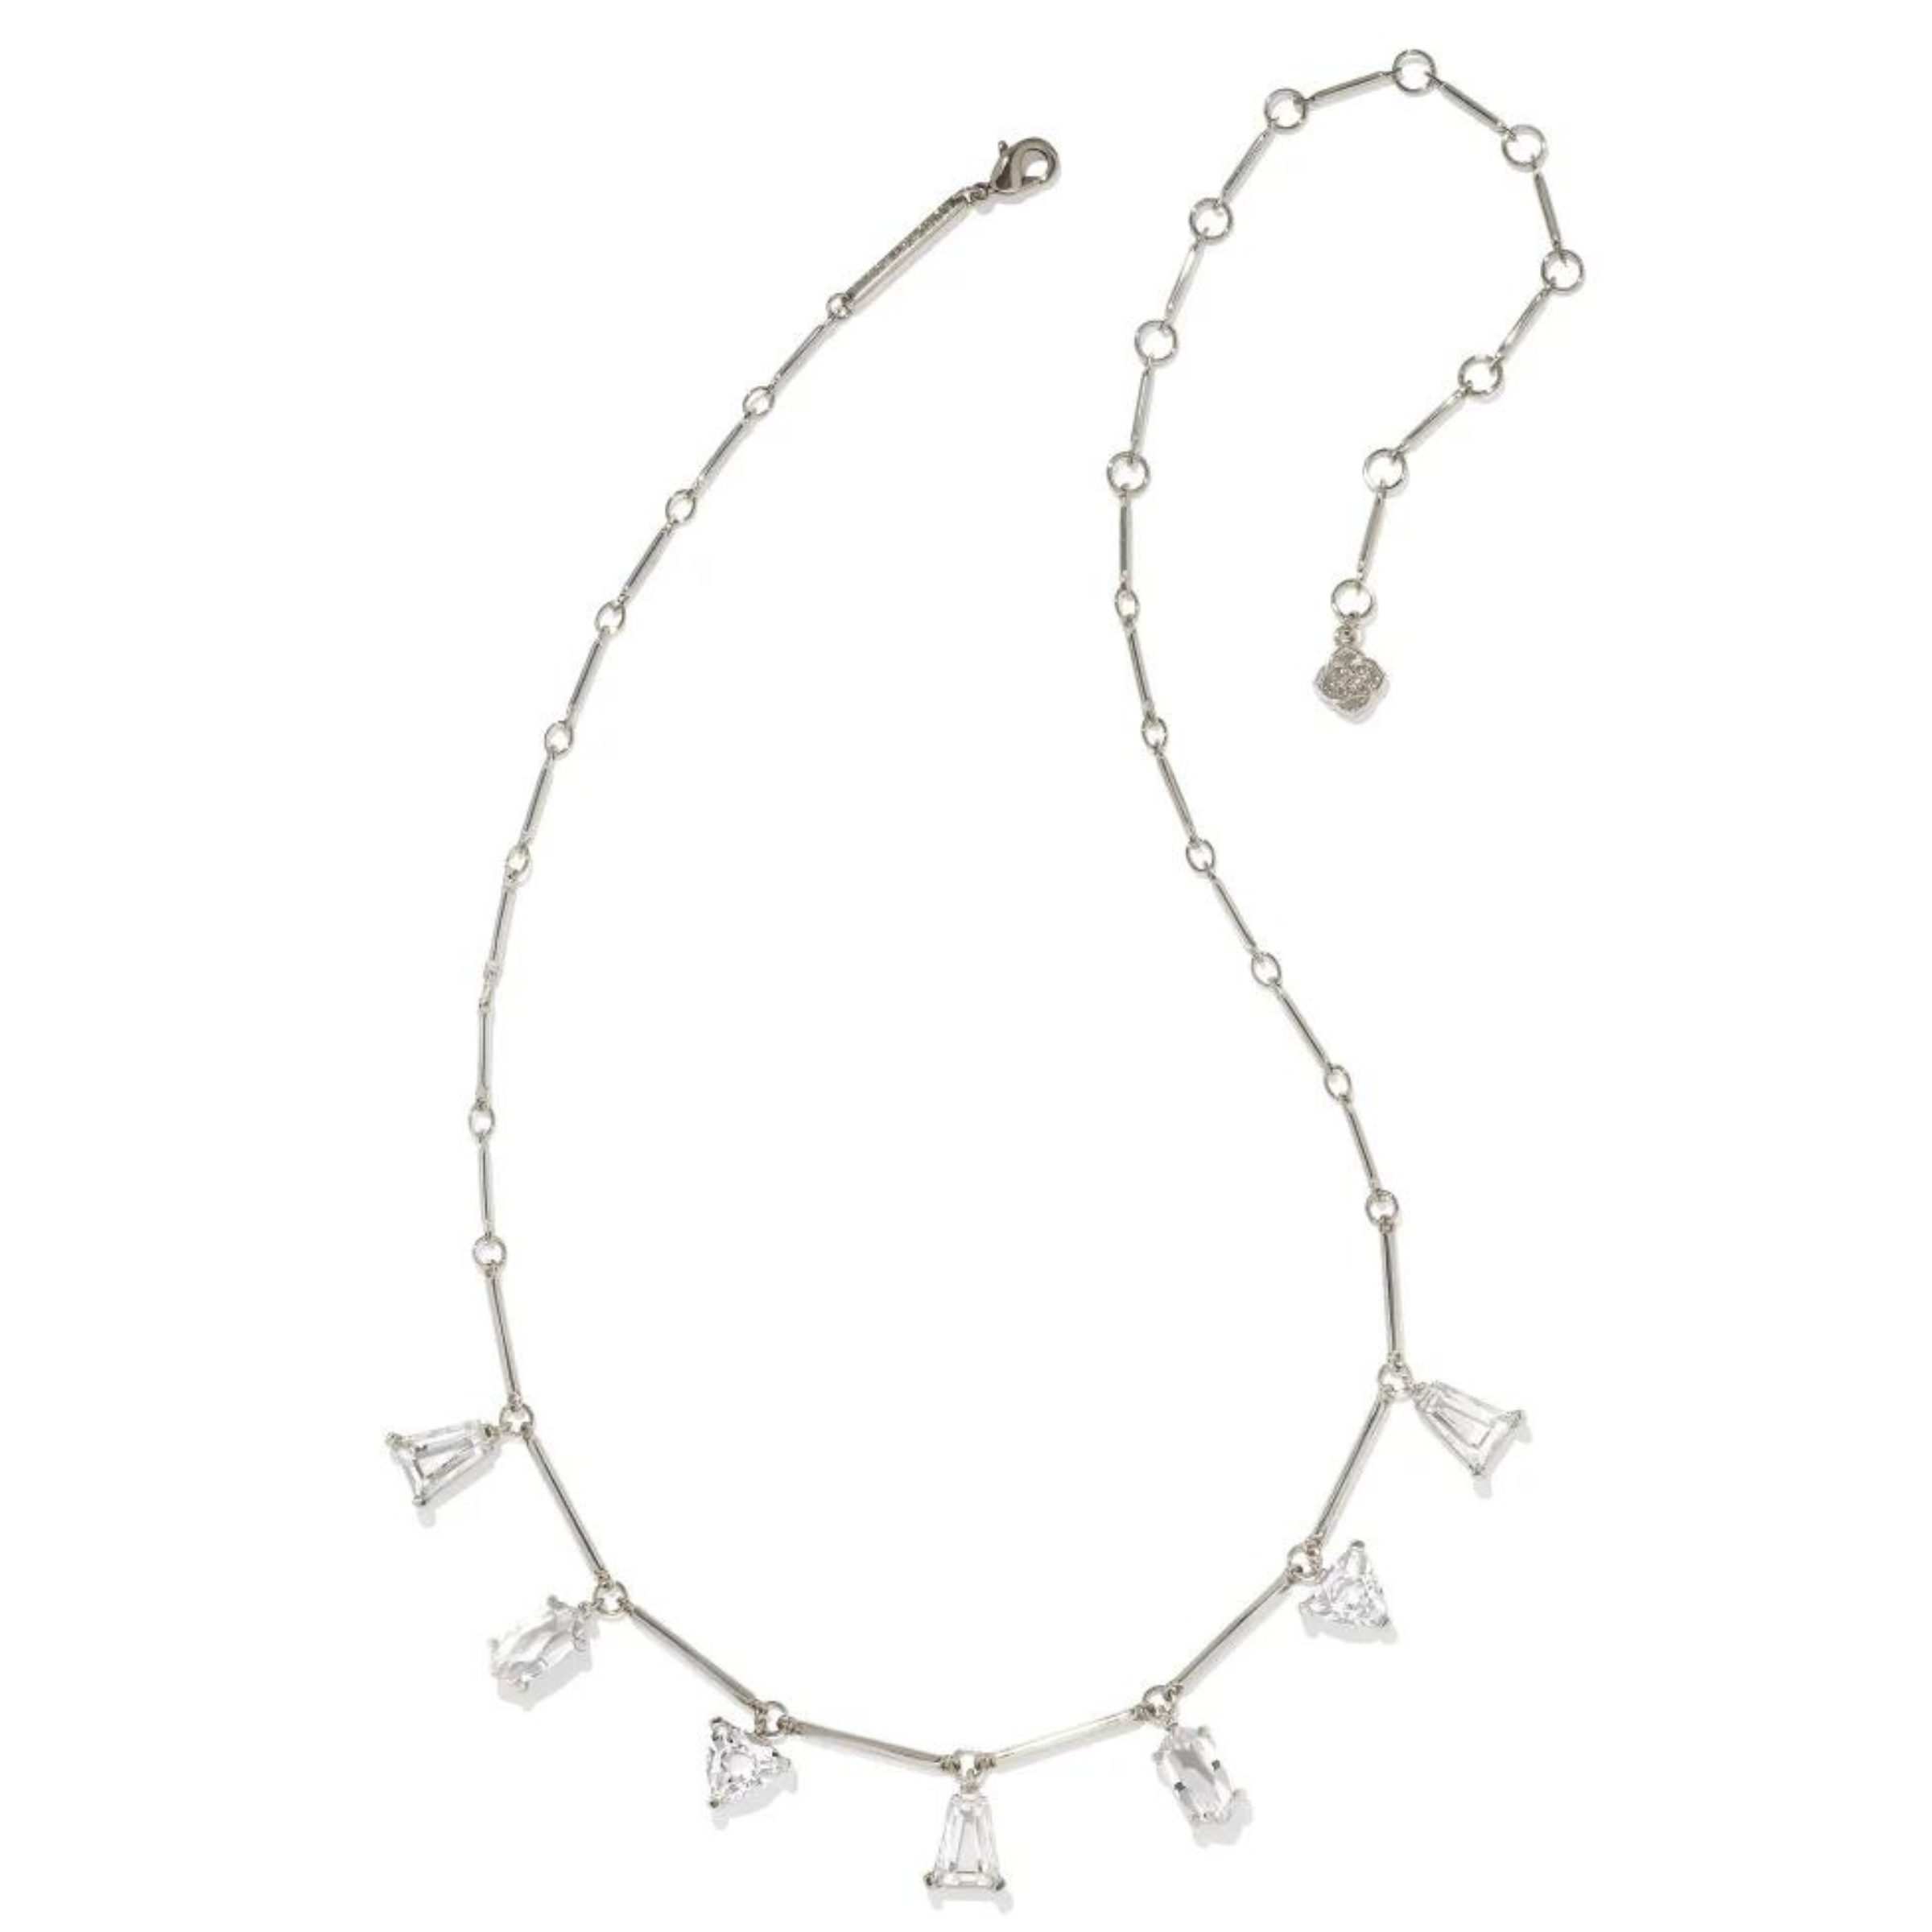 Silver chain necklace with white crystal charms in different shapes. This necklace is pictured on a white background.